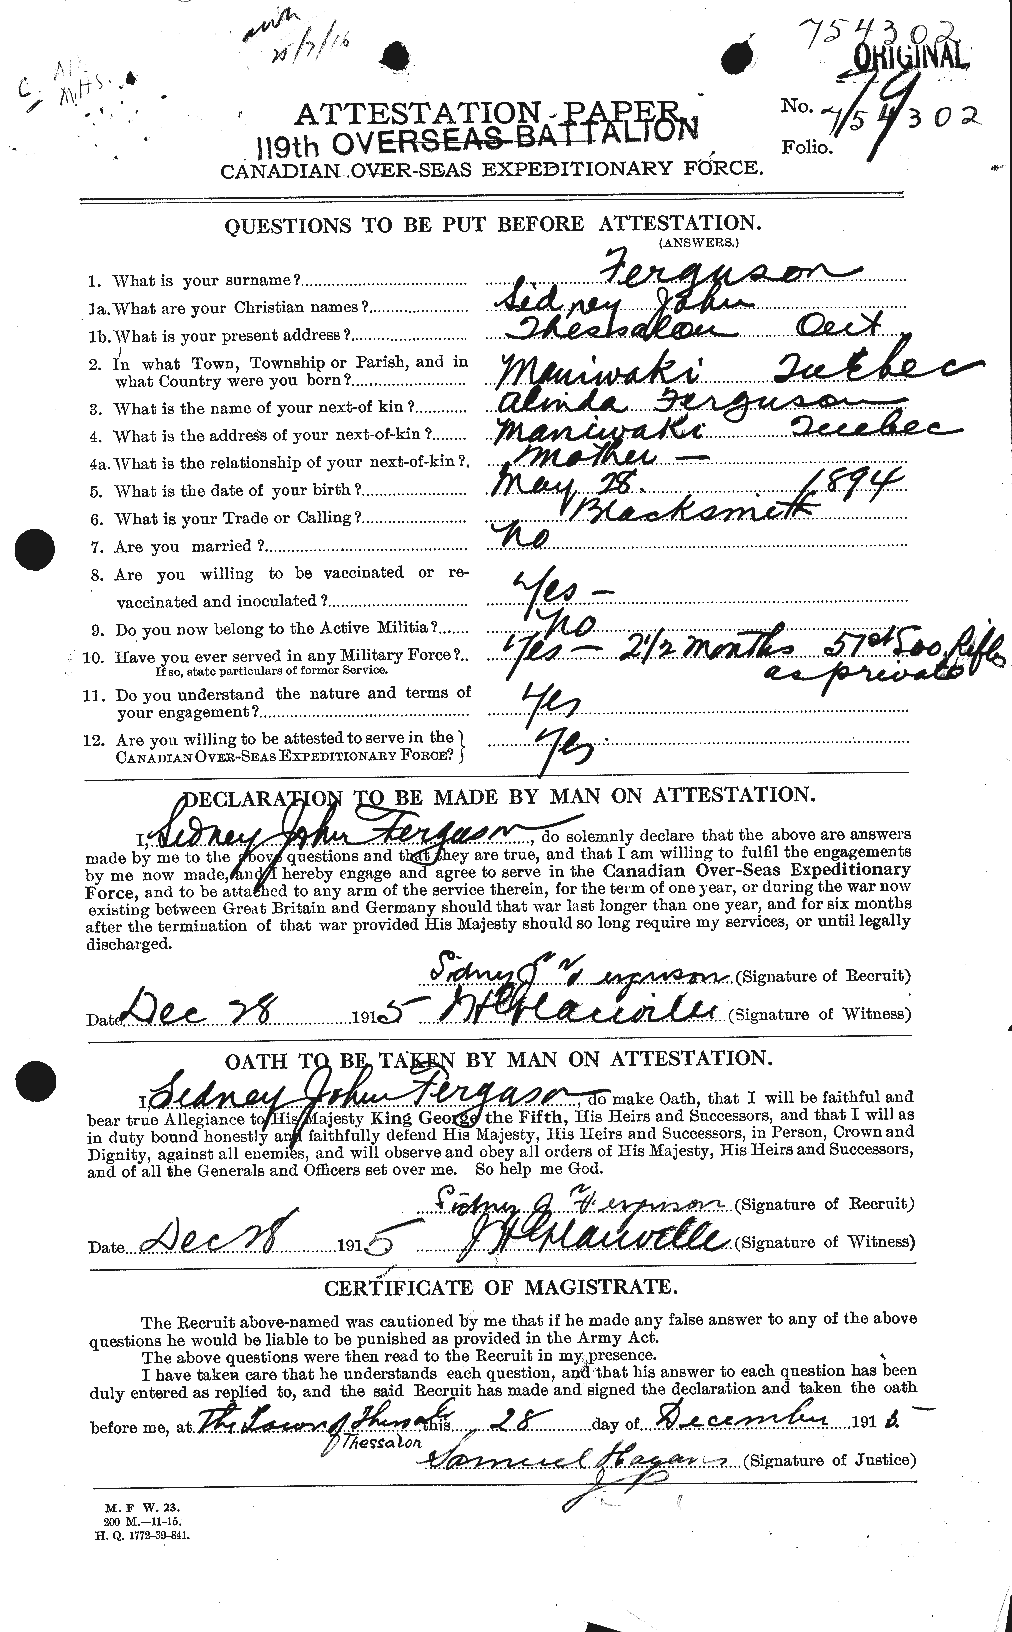 Personnel Records of the First World War - CEF 321664a